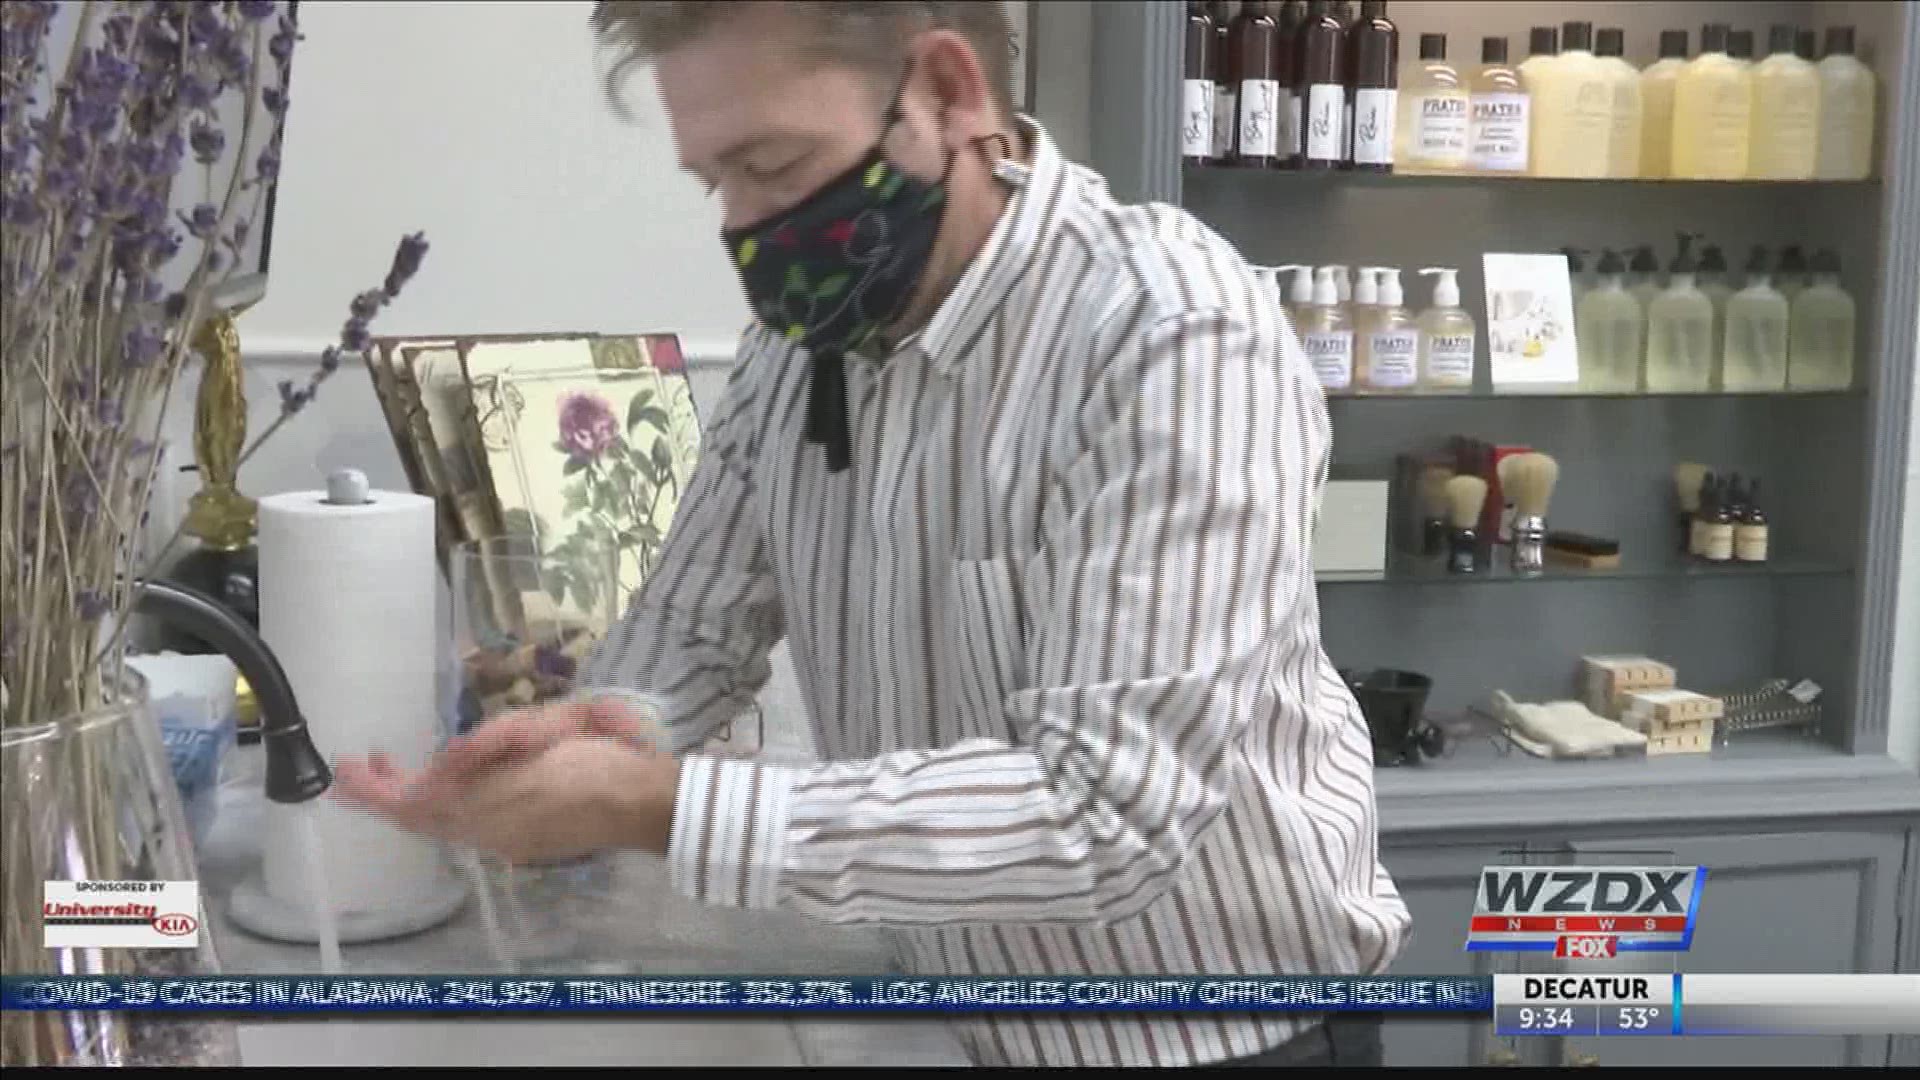 Some Black Friday shoppers in Decatur say they feel safe with the number of people wearing masks.